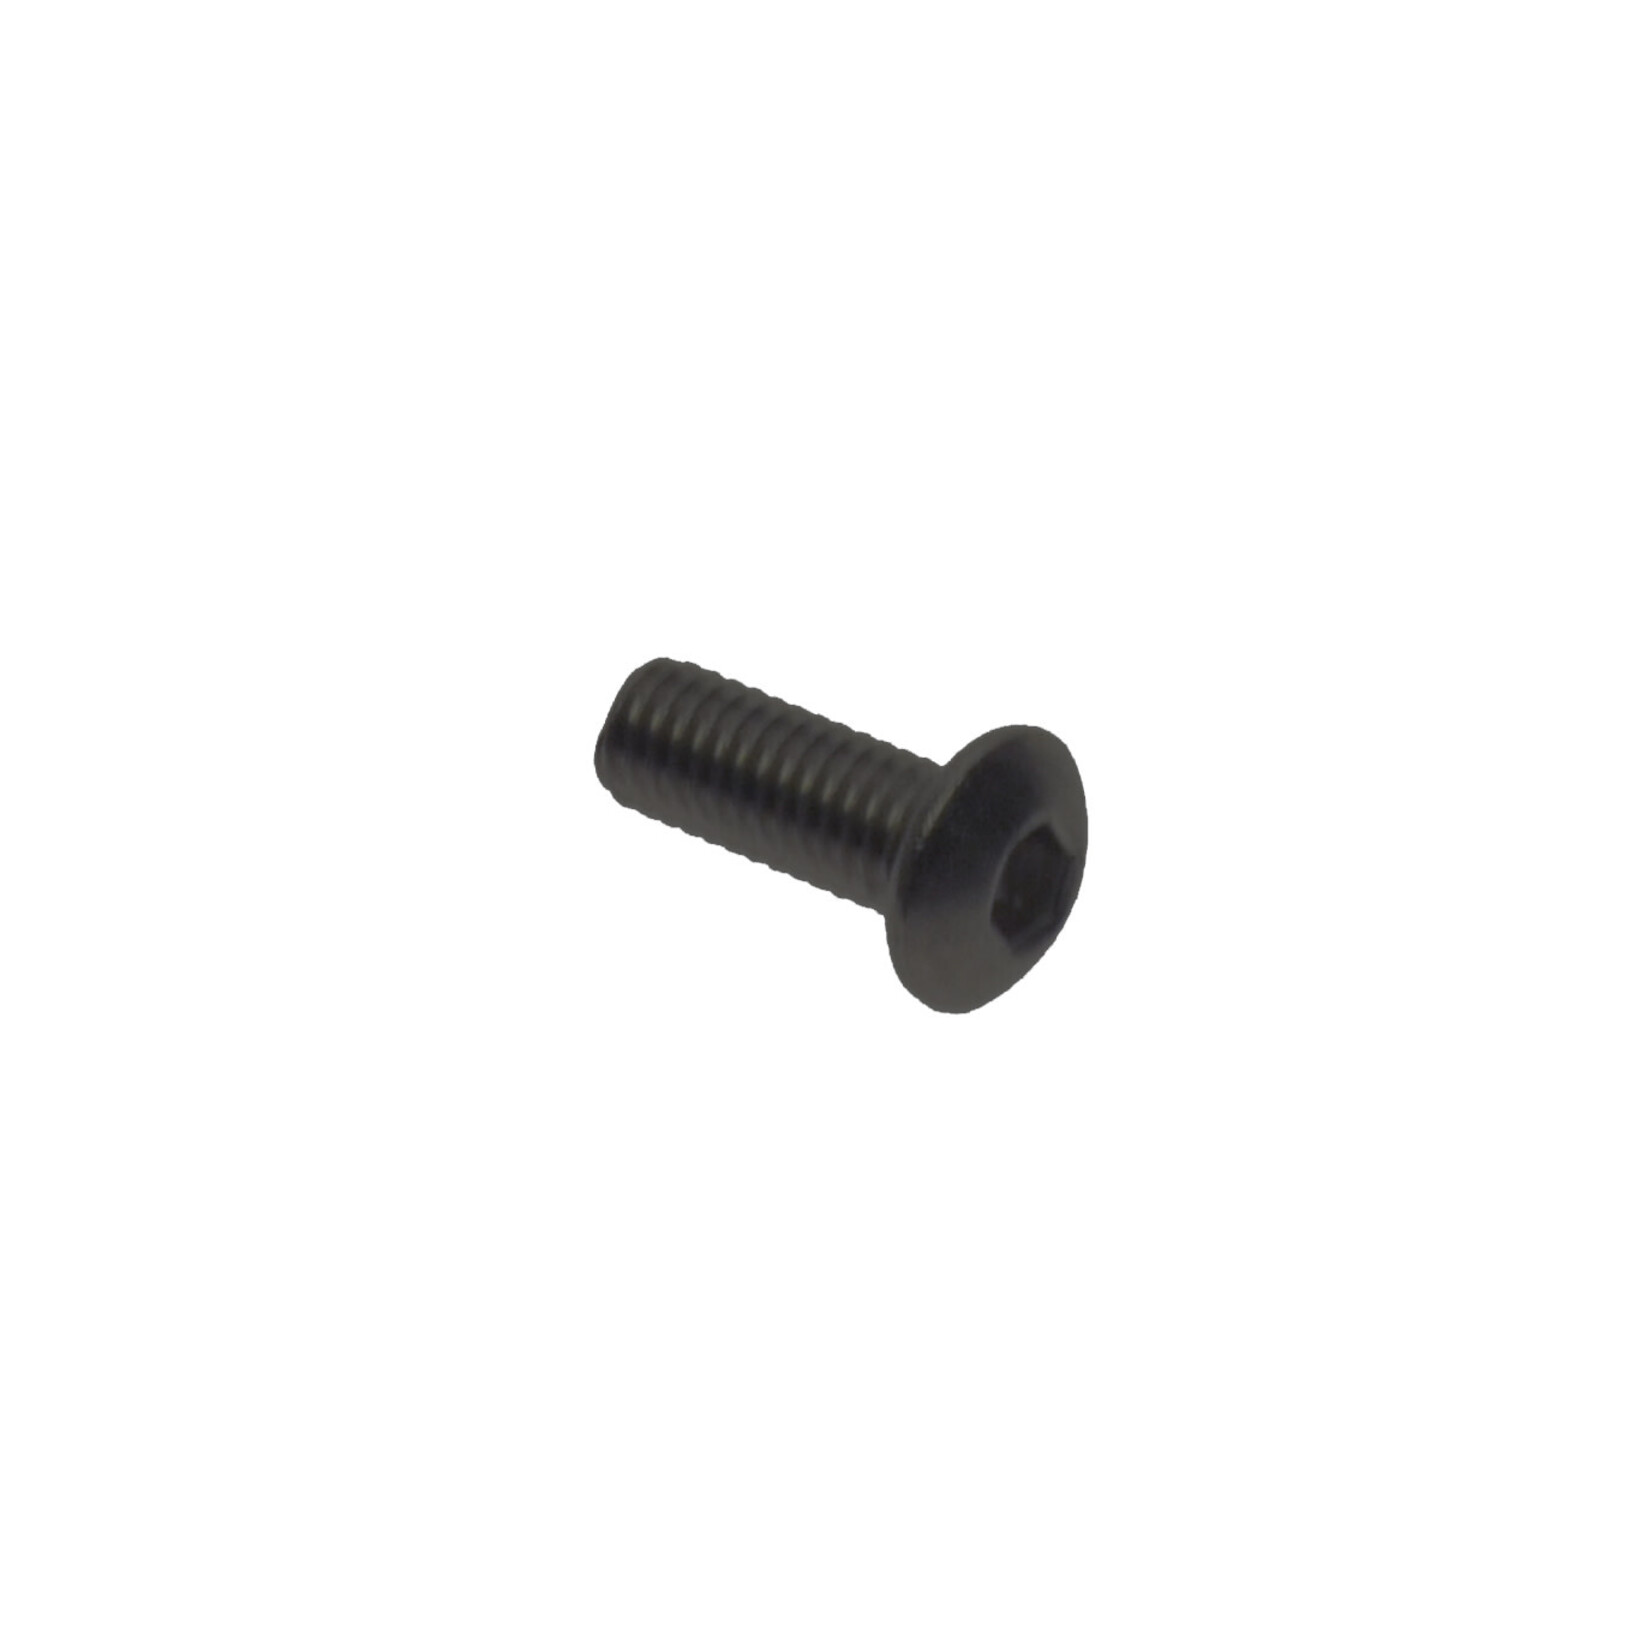 NORCO Norco Gizmo Port Mounting Screw M3x8mm